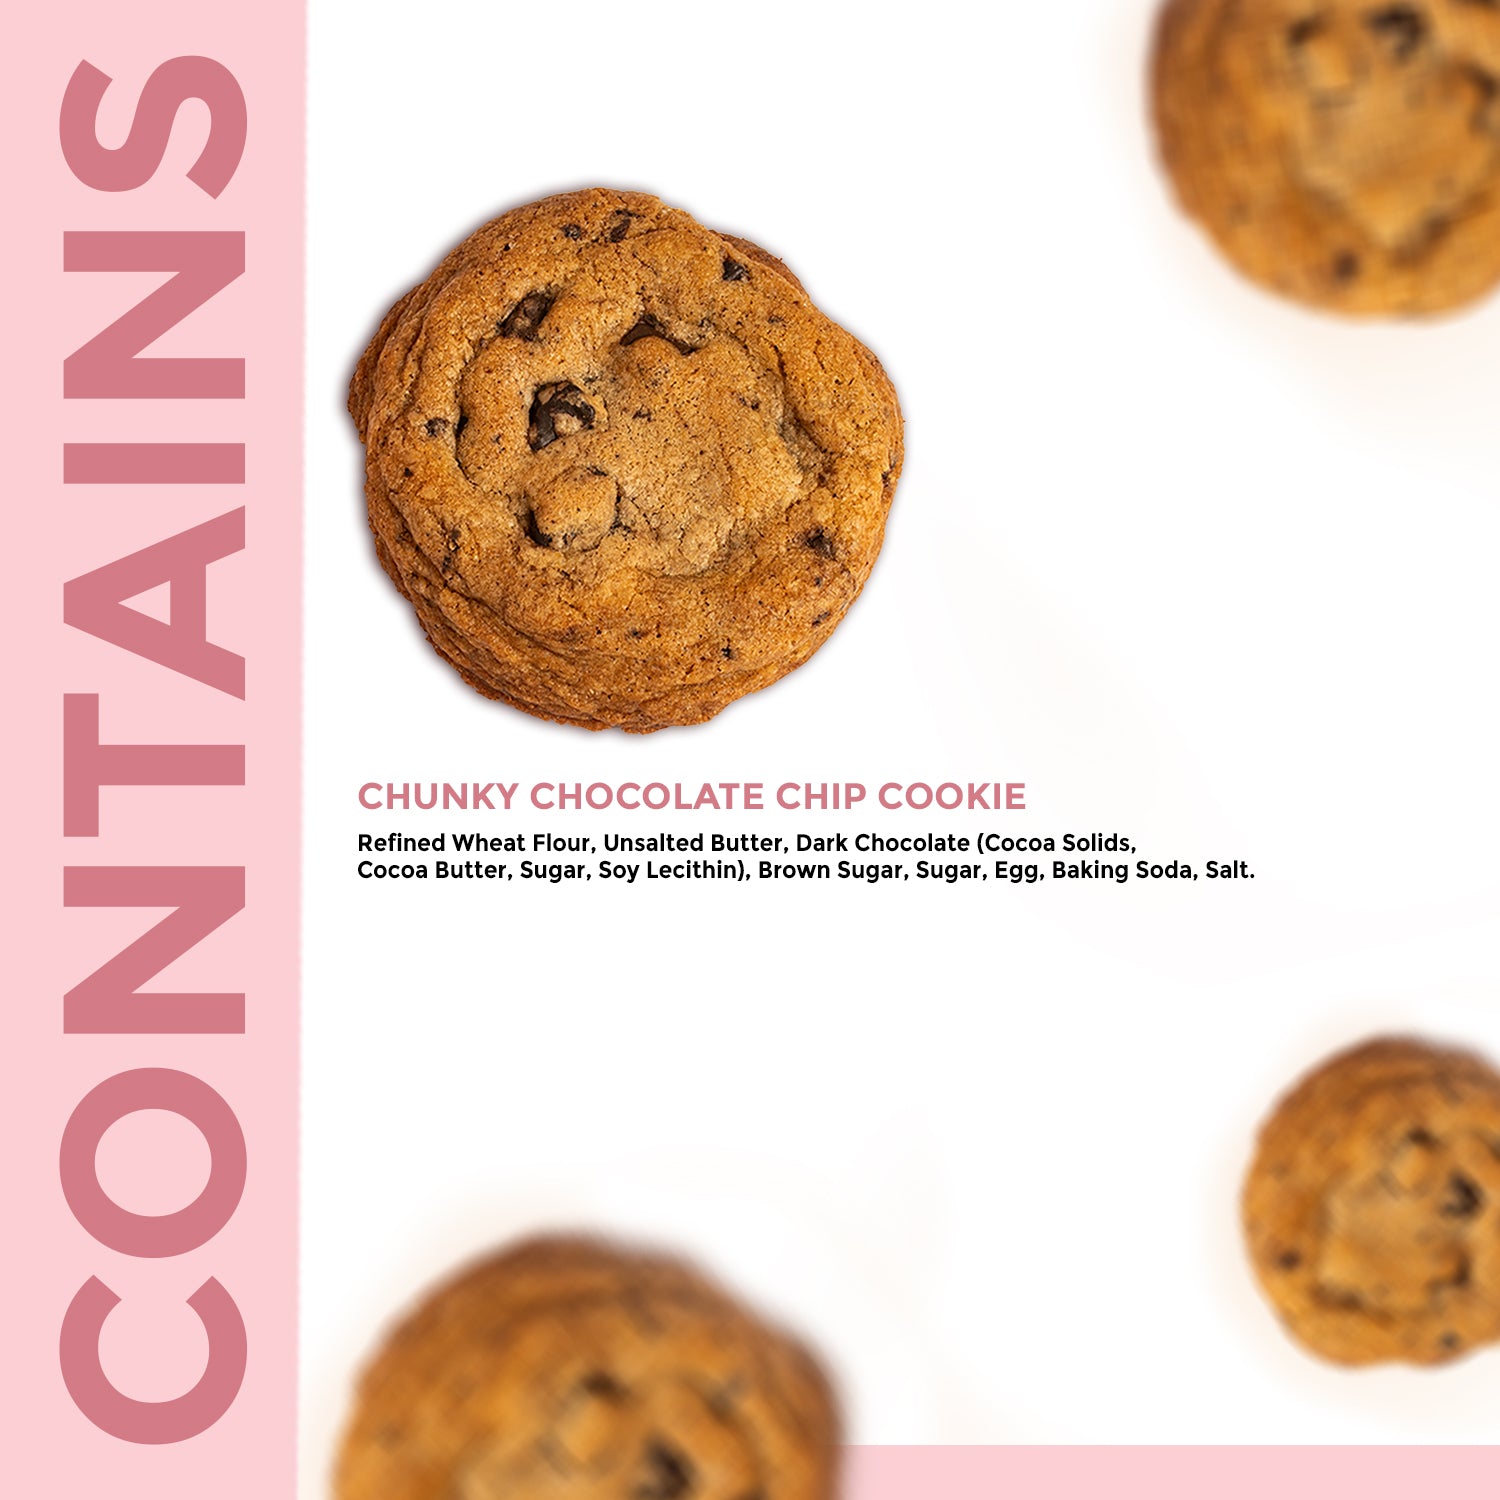 Cocosutra Chunky Chocolate Chip Cookies - Freshly Baked - With Egg